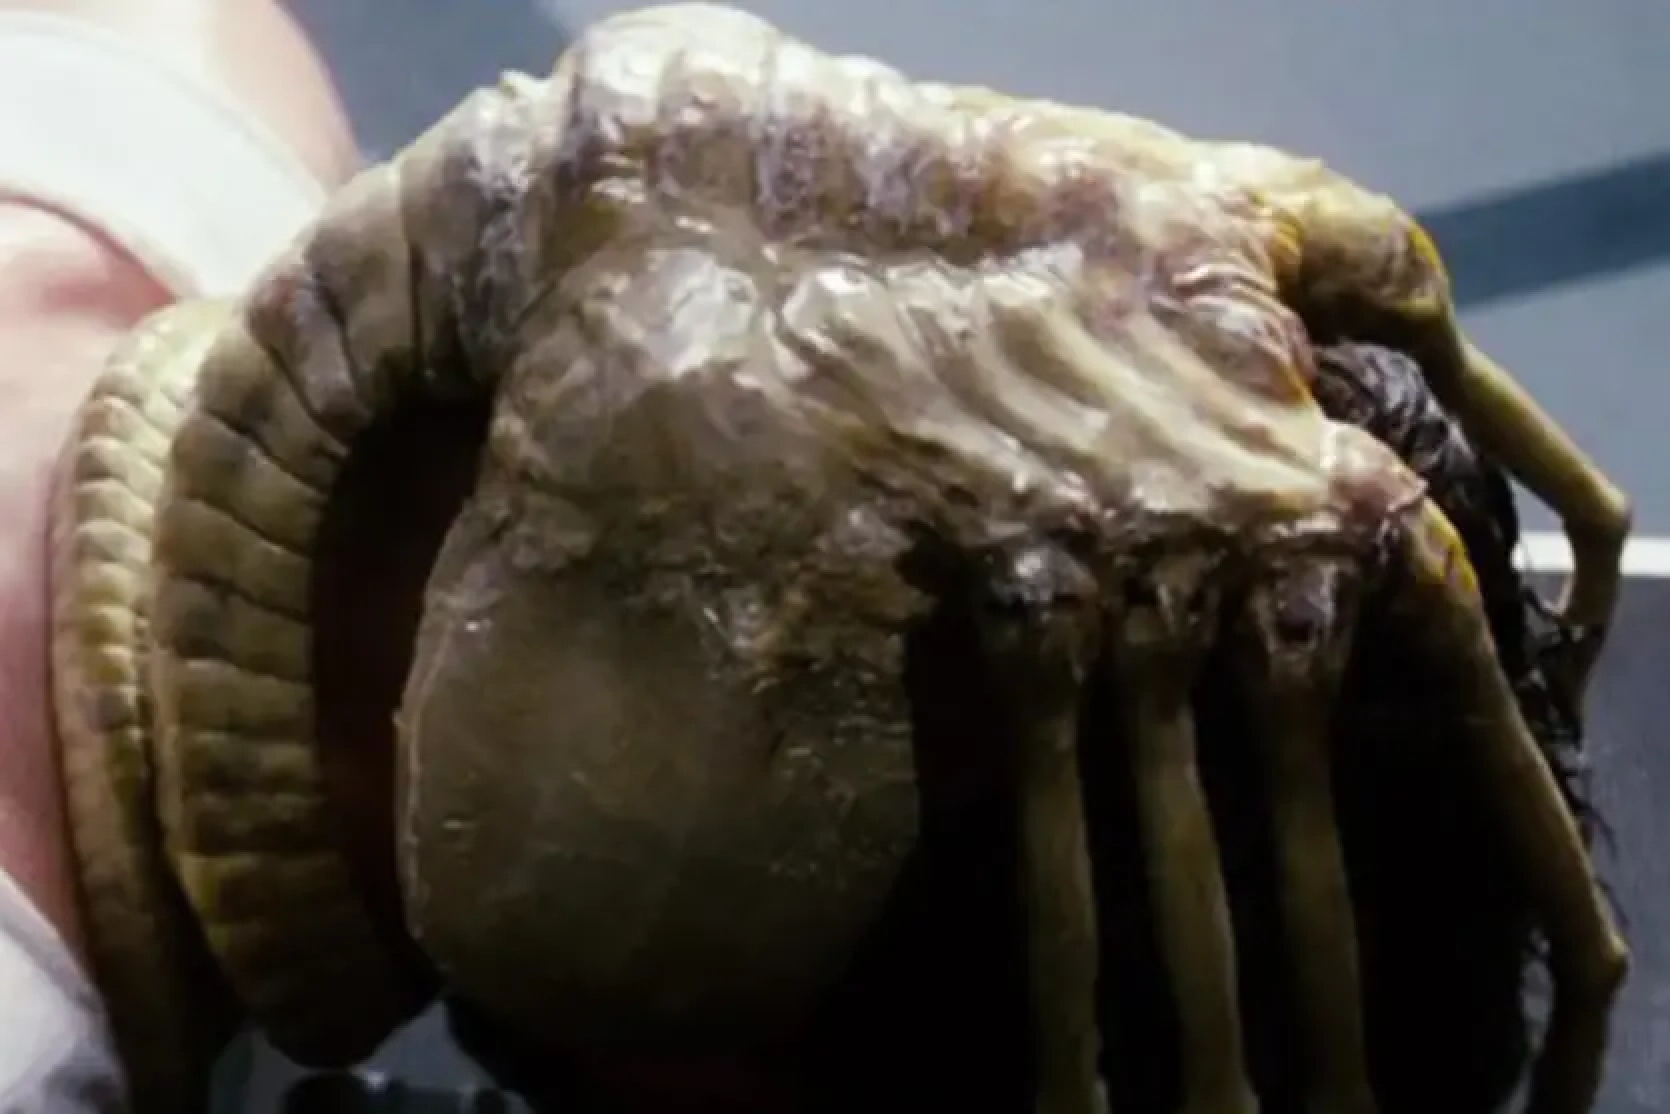 The director of the movie "Alien: Romulus" showed a model of the face grabber - the alien ran on the floor